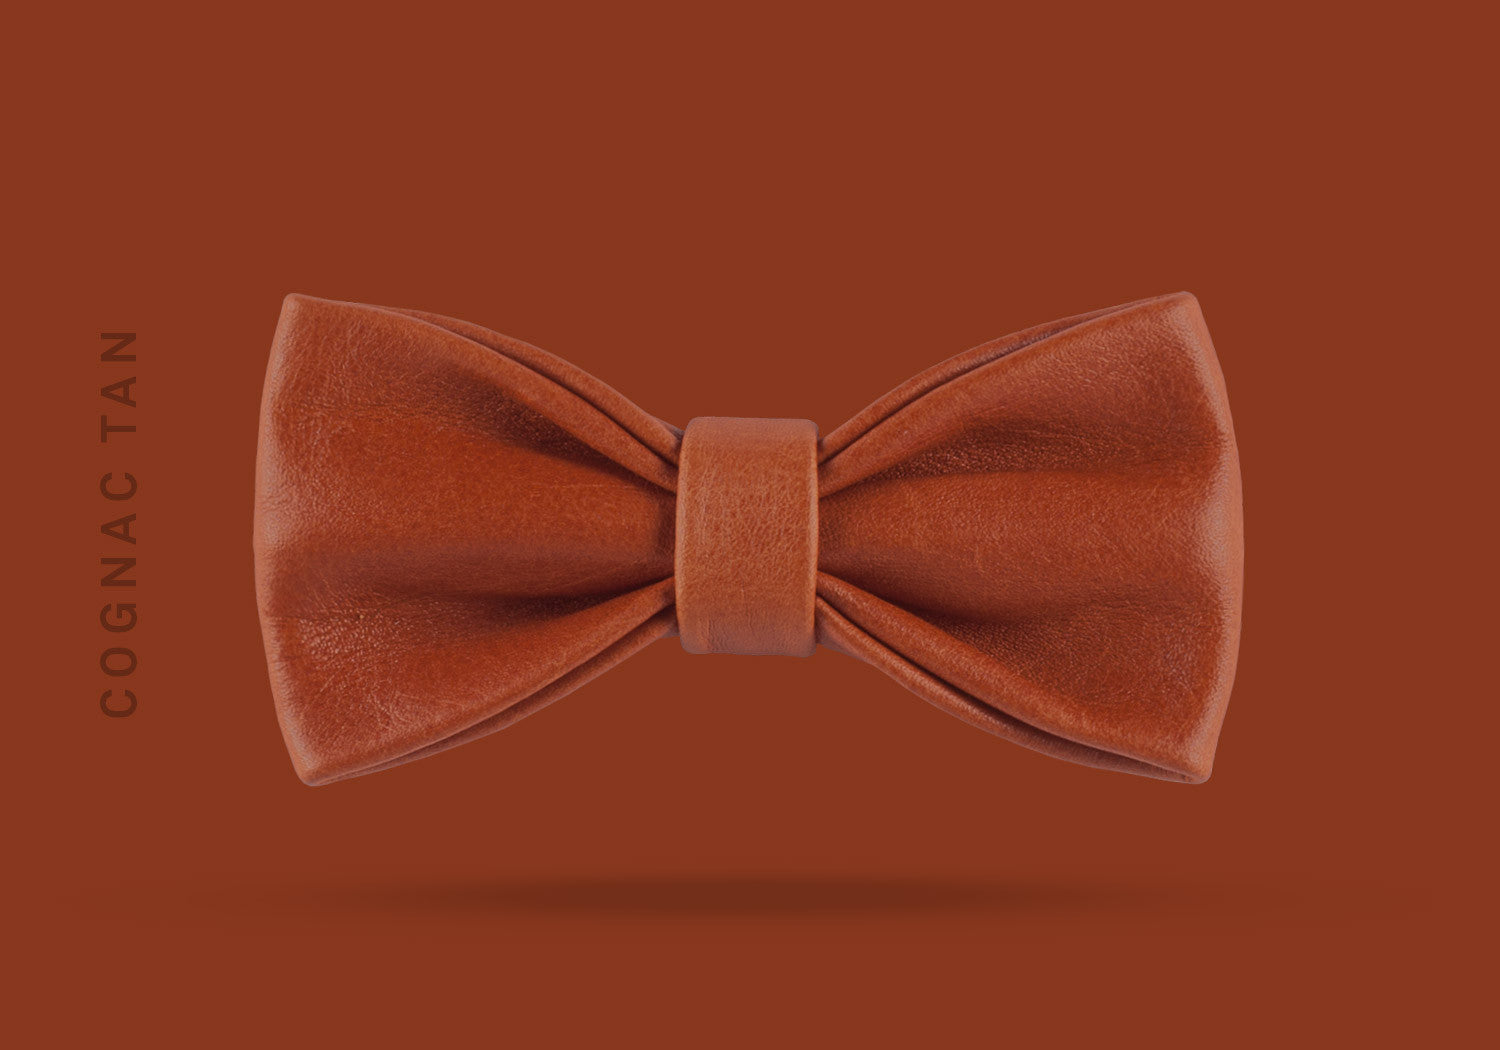 This cognac tan WEEF handmade leather bow is a great present or gift idea for dapper and stylish gentlemen for fathers day, valentines day or Christmas.